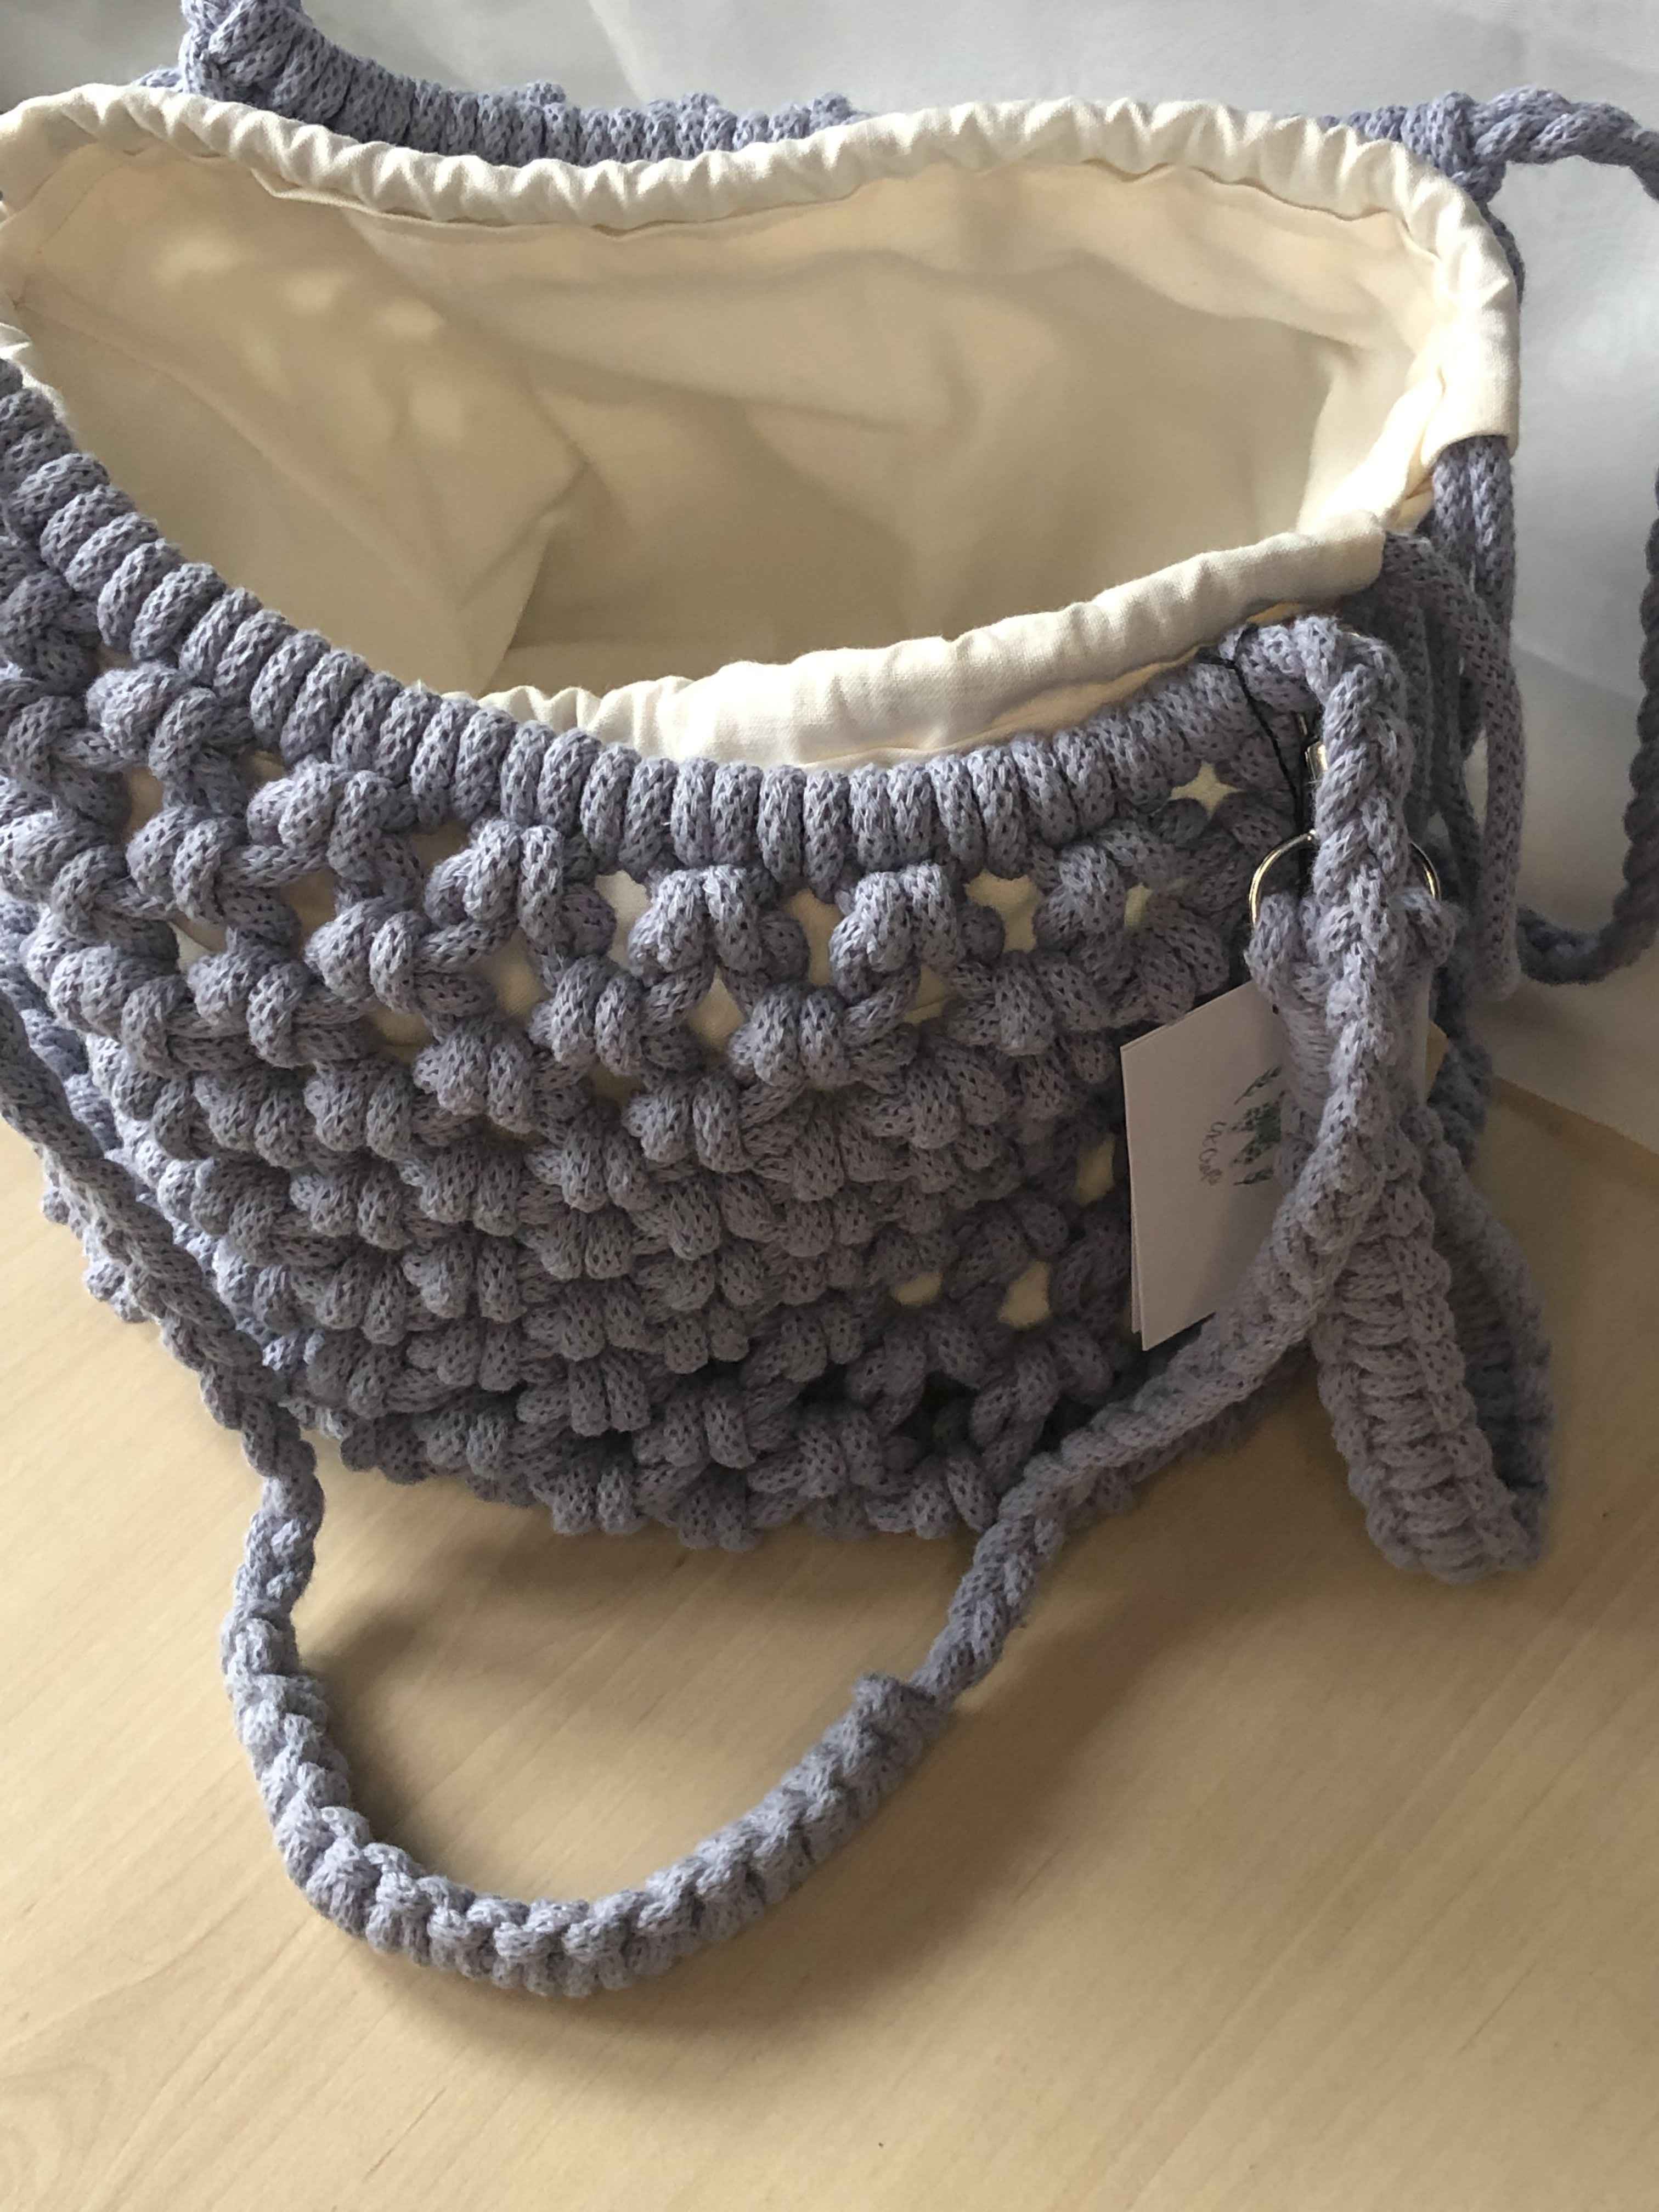 Macrame bag with removable liner. 